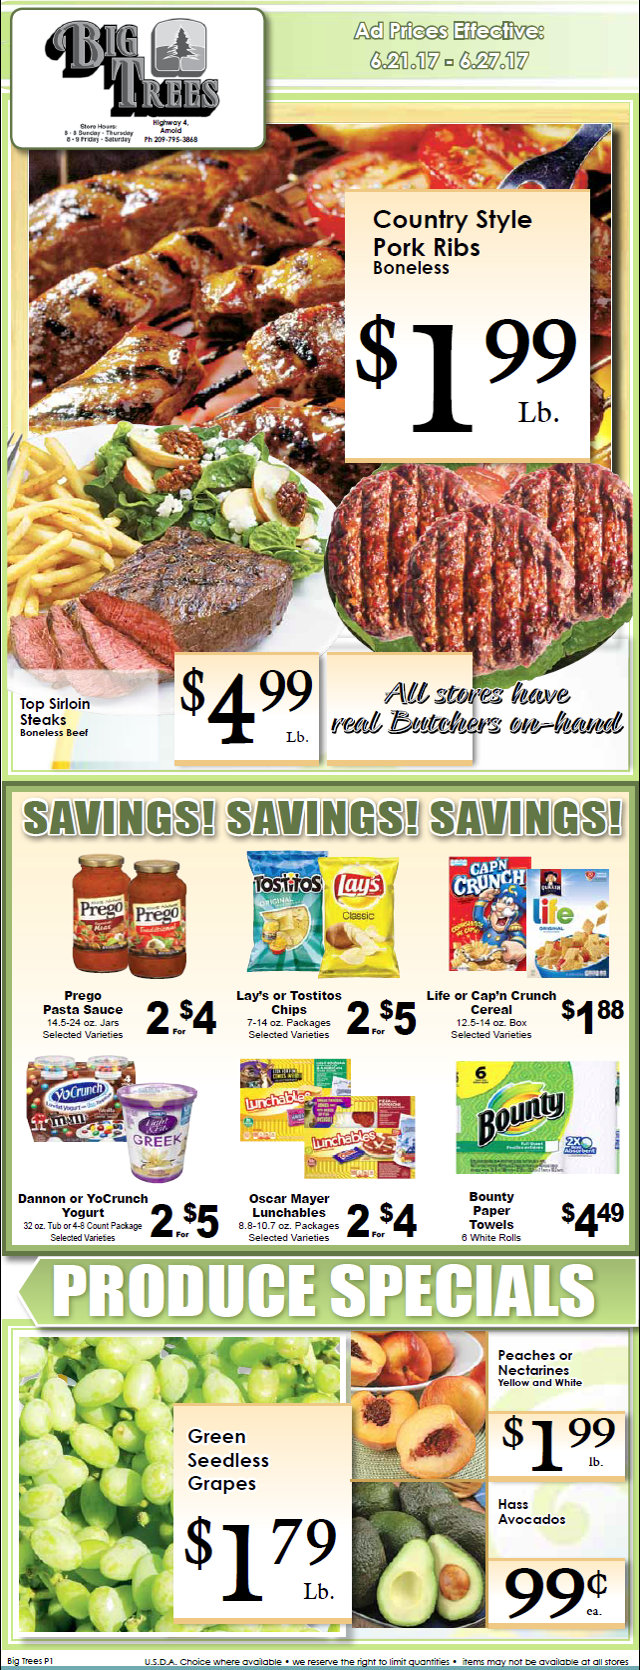 Big Trees Market’s Weekly Ad & Specials Through June 27th